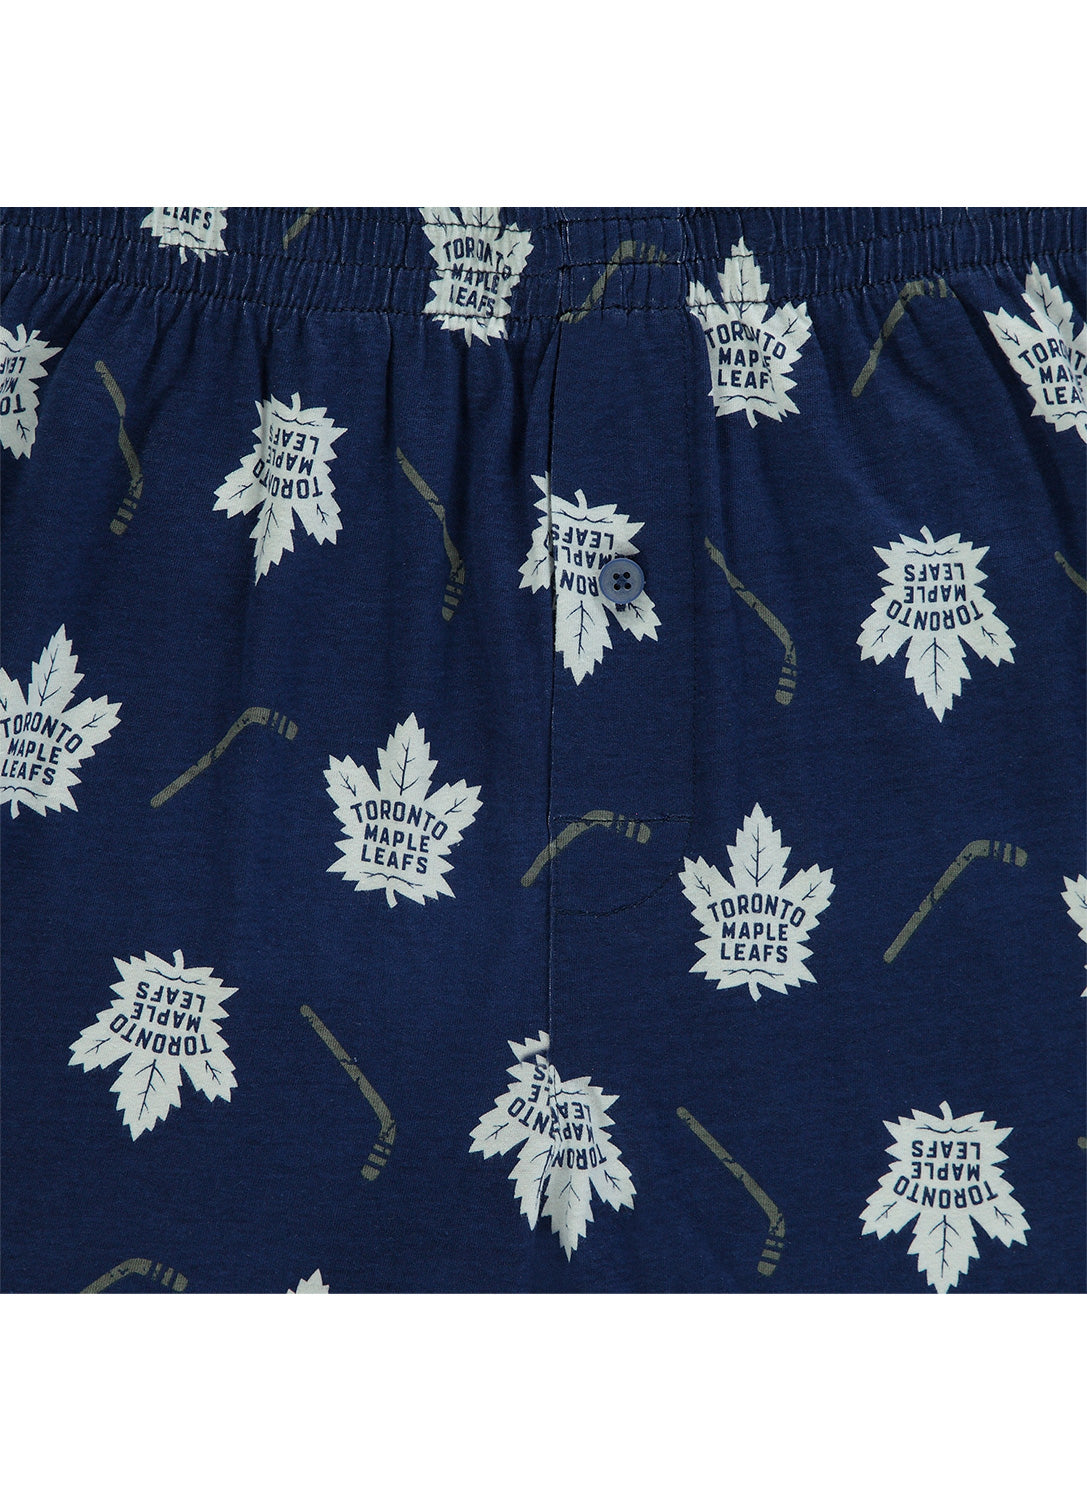 Detail mens boxers with Toronto Maple Leafs print (navy)